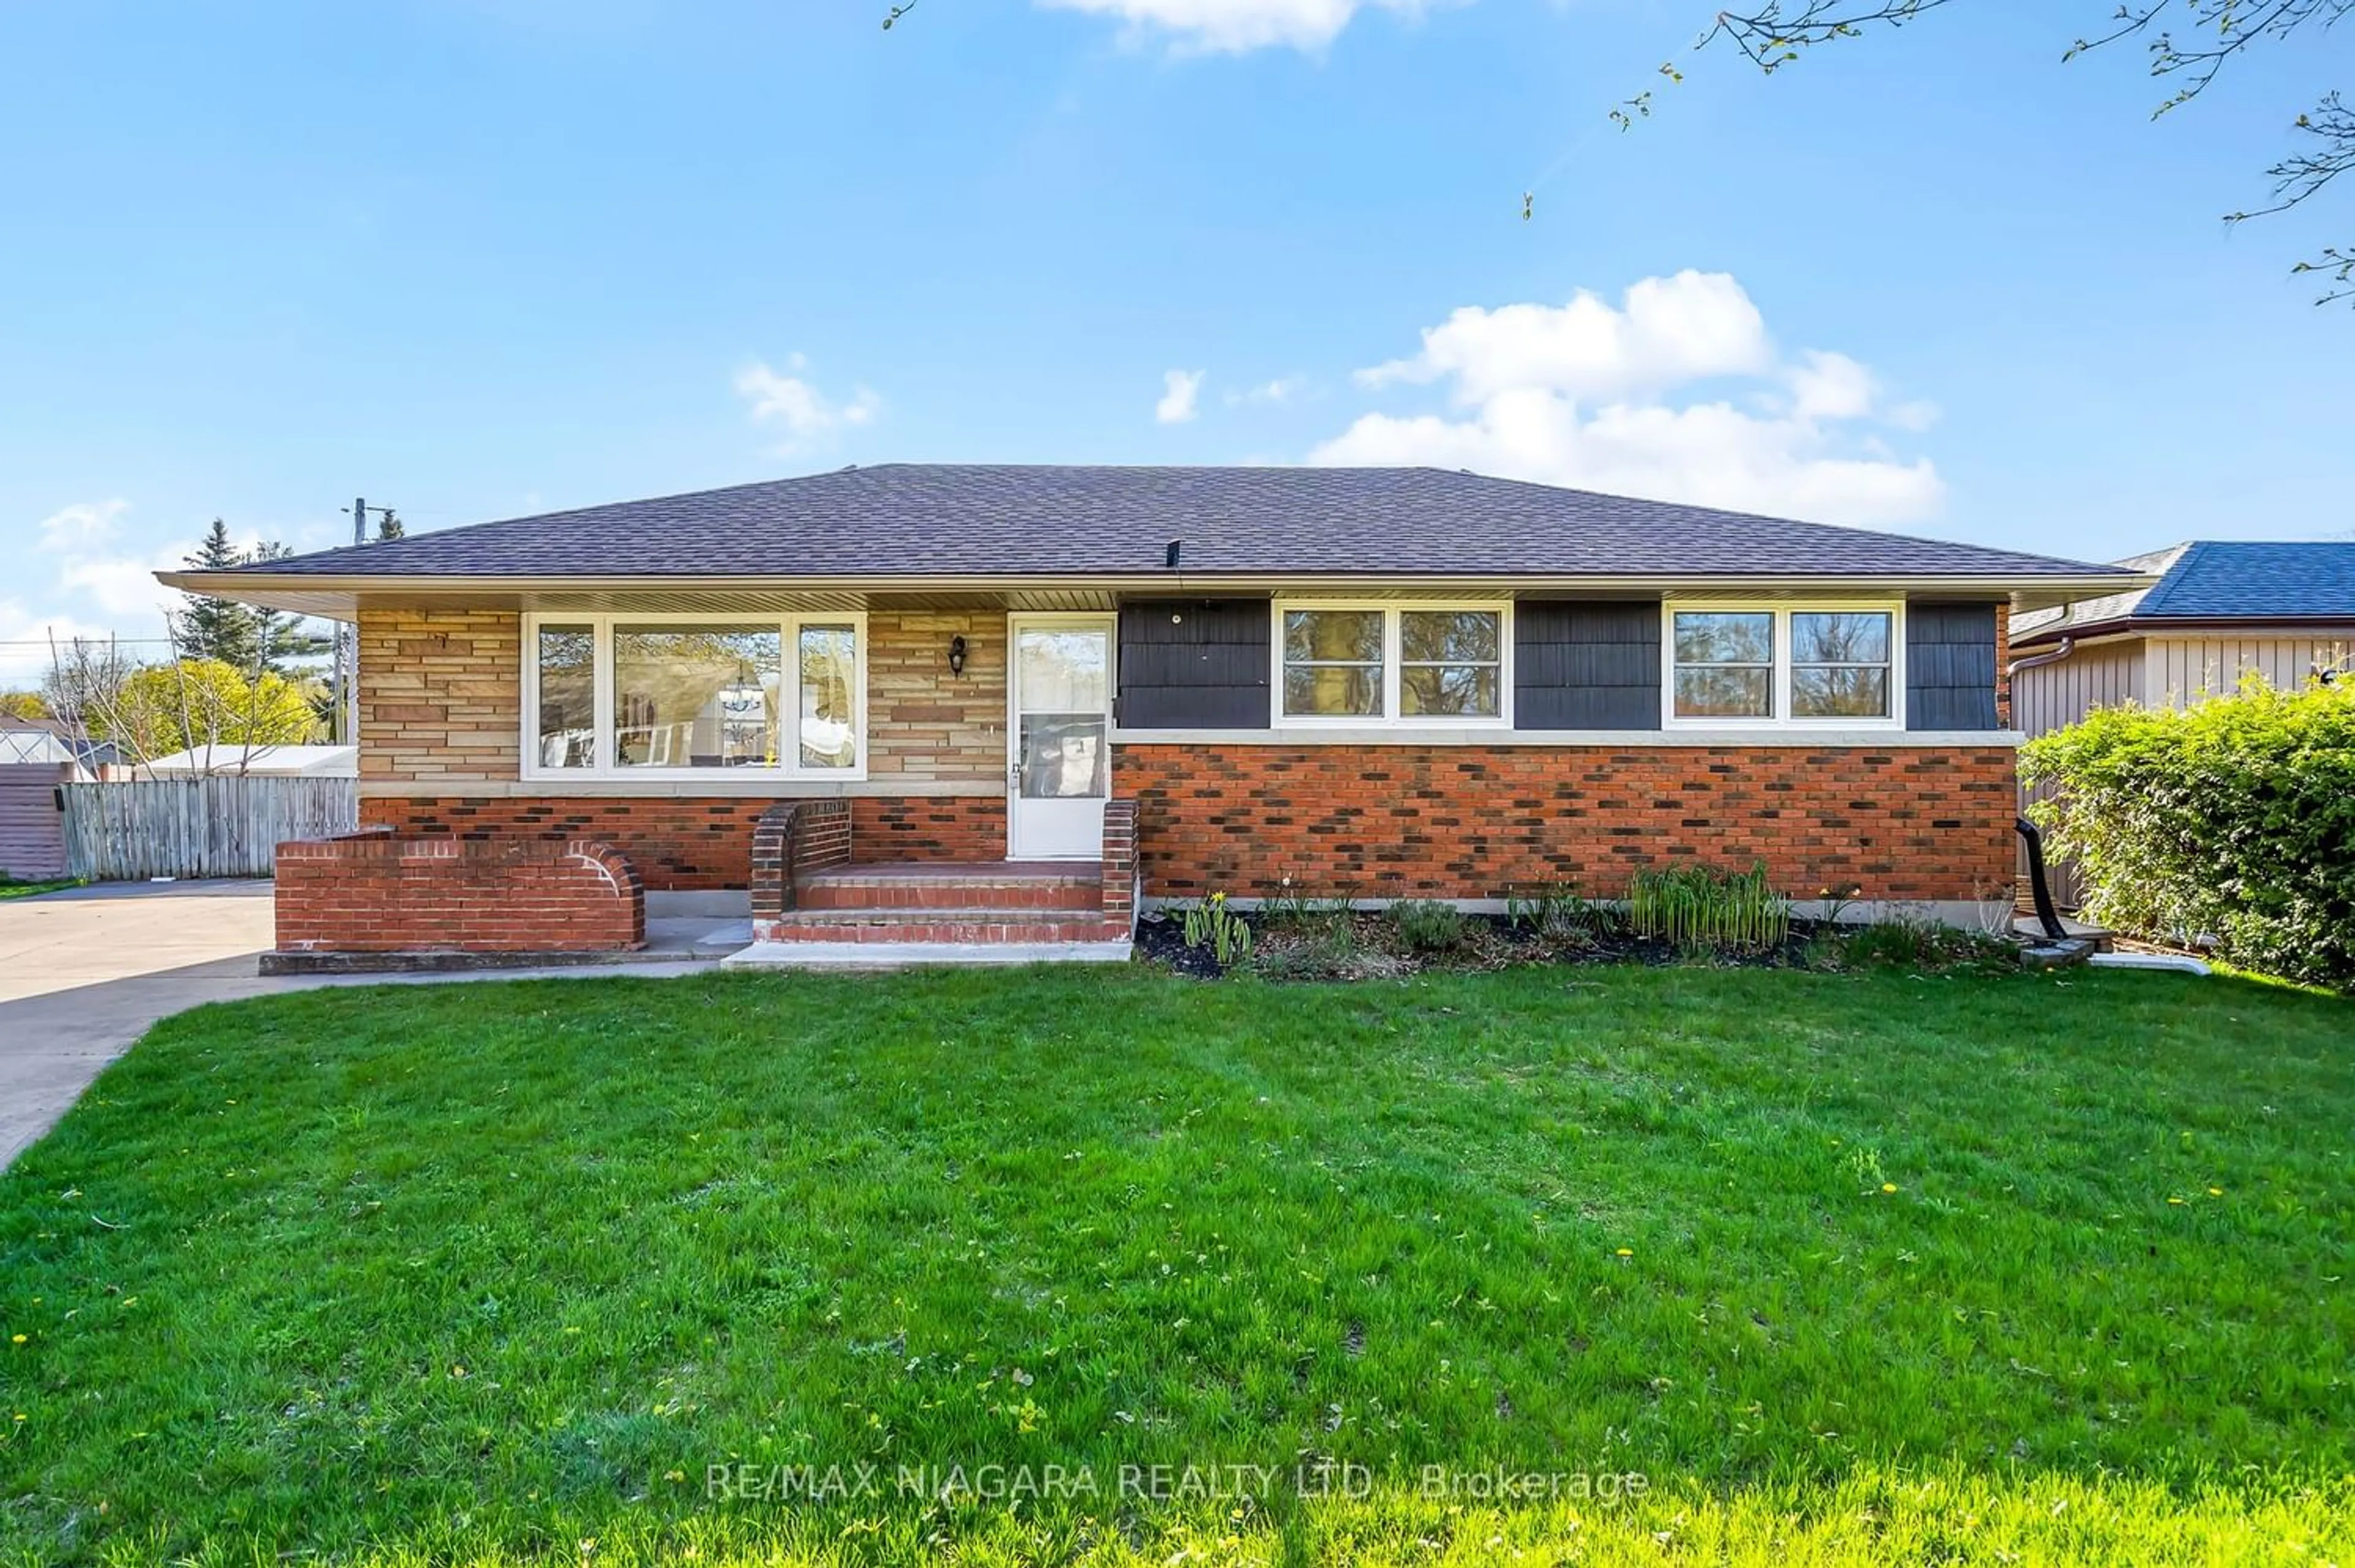 Home with brick exterior material for 41 Woodelm Dr, St. Catharines Ontario L2M 4N6